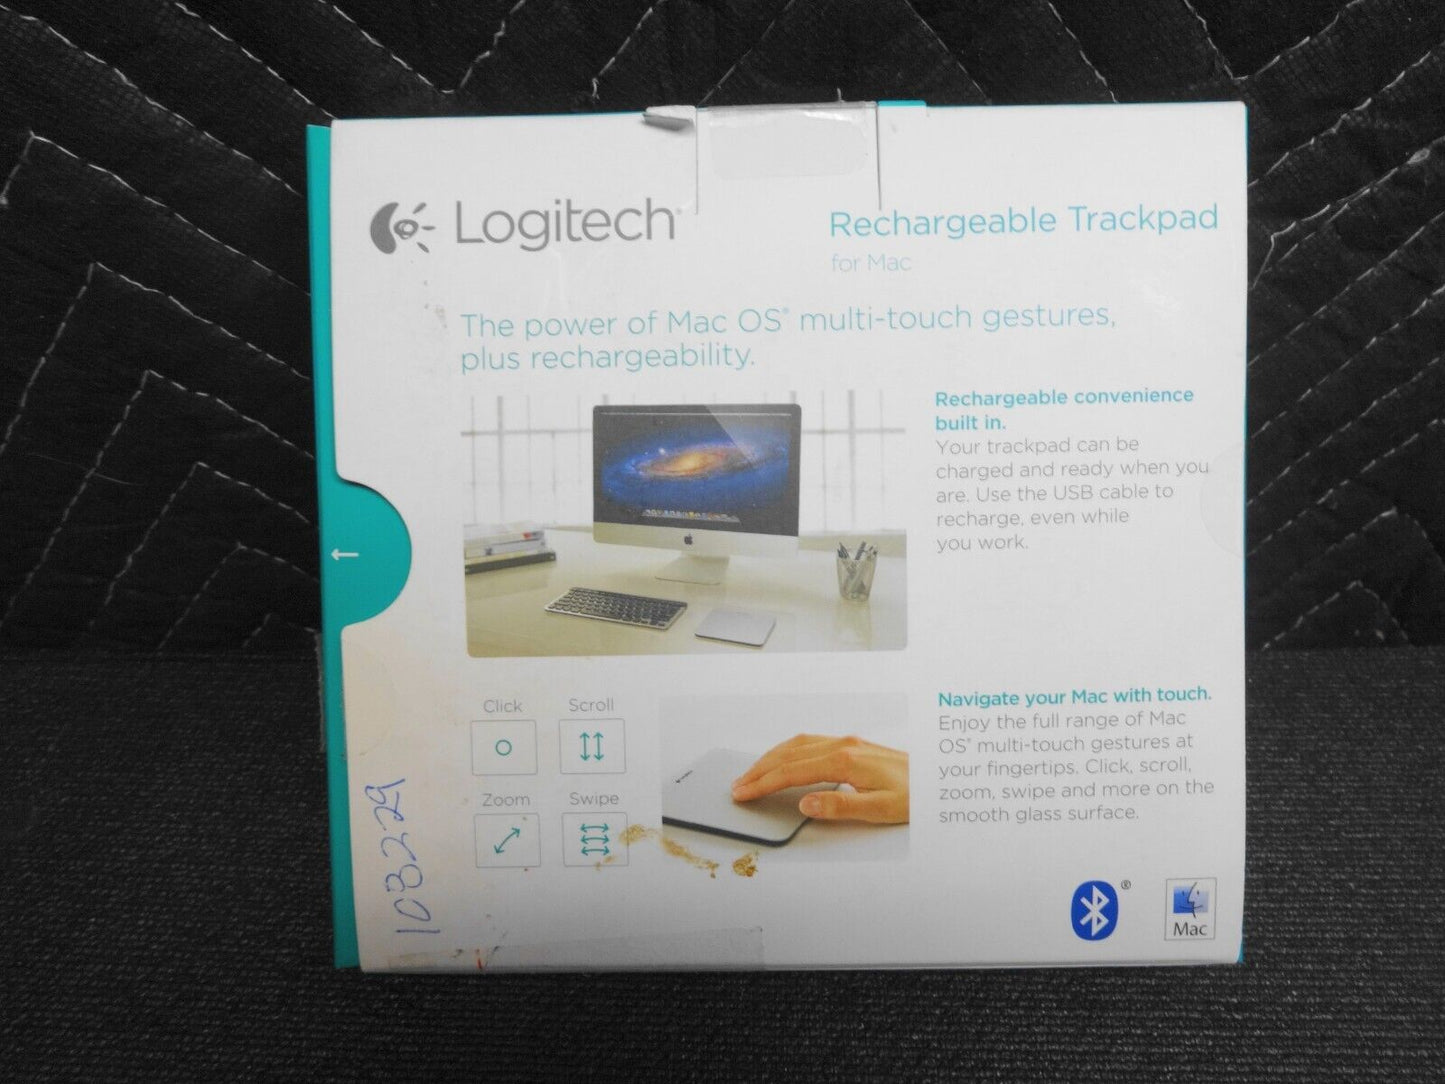 Logitech T651 Rechargeable Trackpad Touchpad for Mac 910-002880